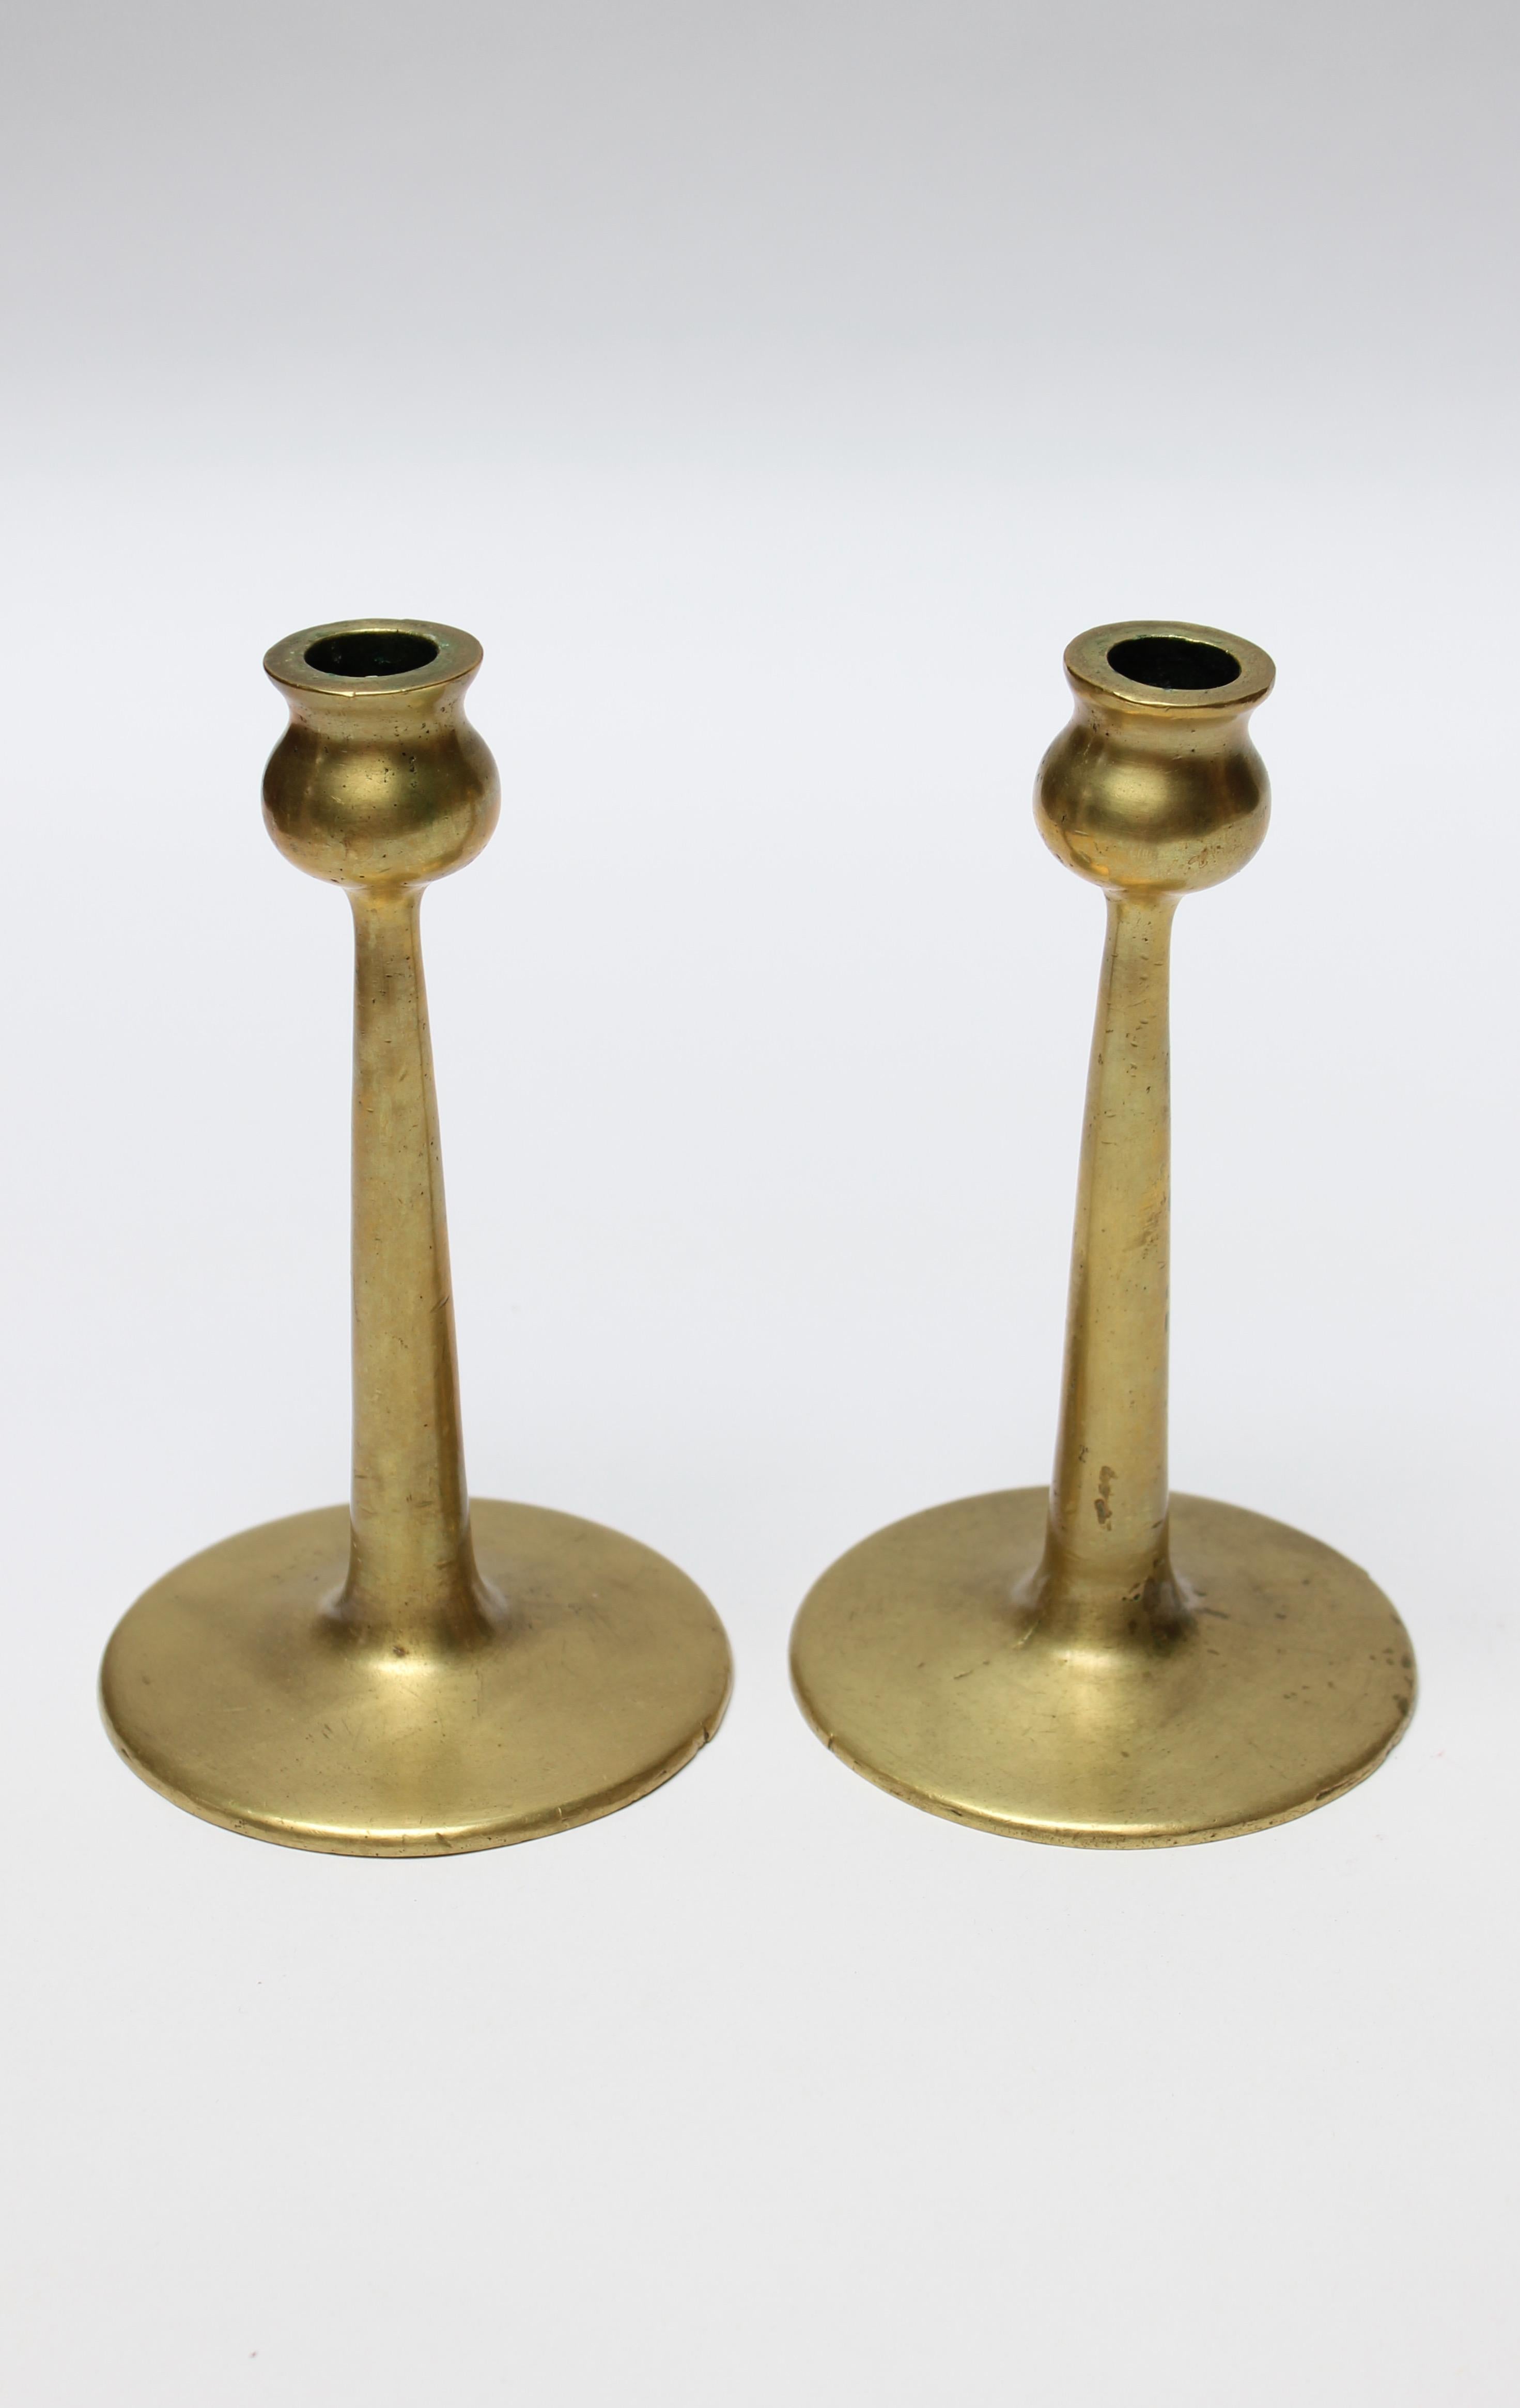 Mid-century brass turned candlesticks, each with bulbous bobeche and cylindrical stem on circular, disk base.
Beautifully aged, showing natural patina (unpolished). 
Measures: Height 6.75